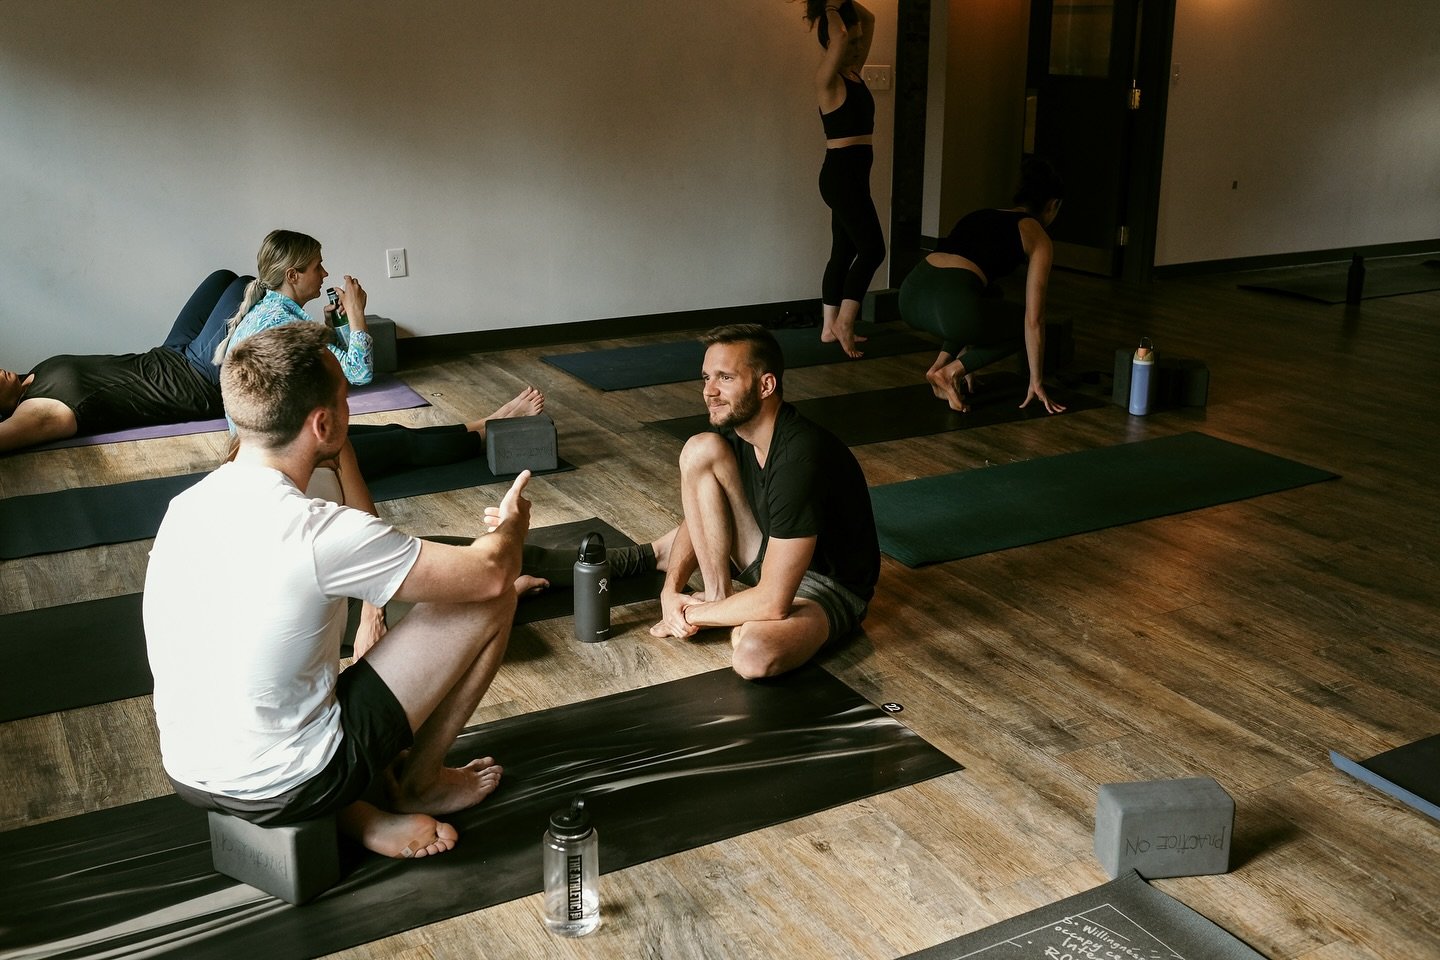 🏃Good luck to all of the marathon runners today! 

Classes are still on at the studio- be sure to give yourselves extra time to park and roll out your mat with ease 😌✨

9:30A Morning Power with Marla 
11:00A Slow Burn with Anastasija 

See you soon